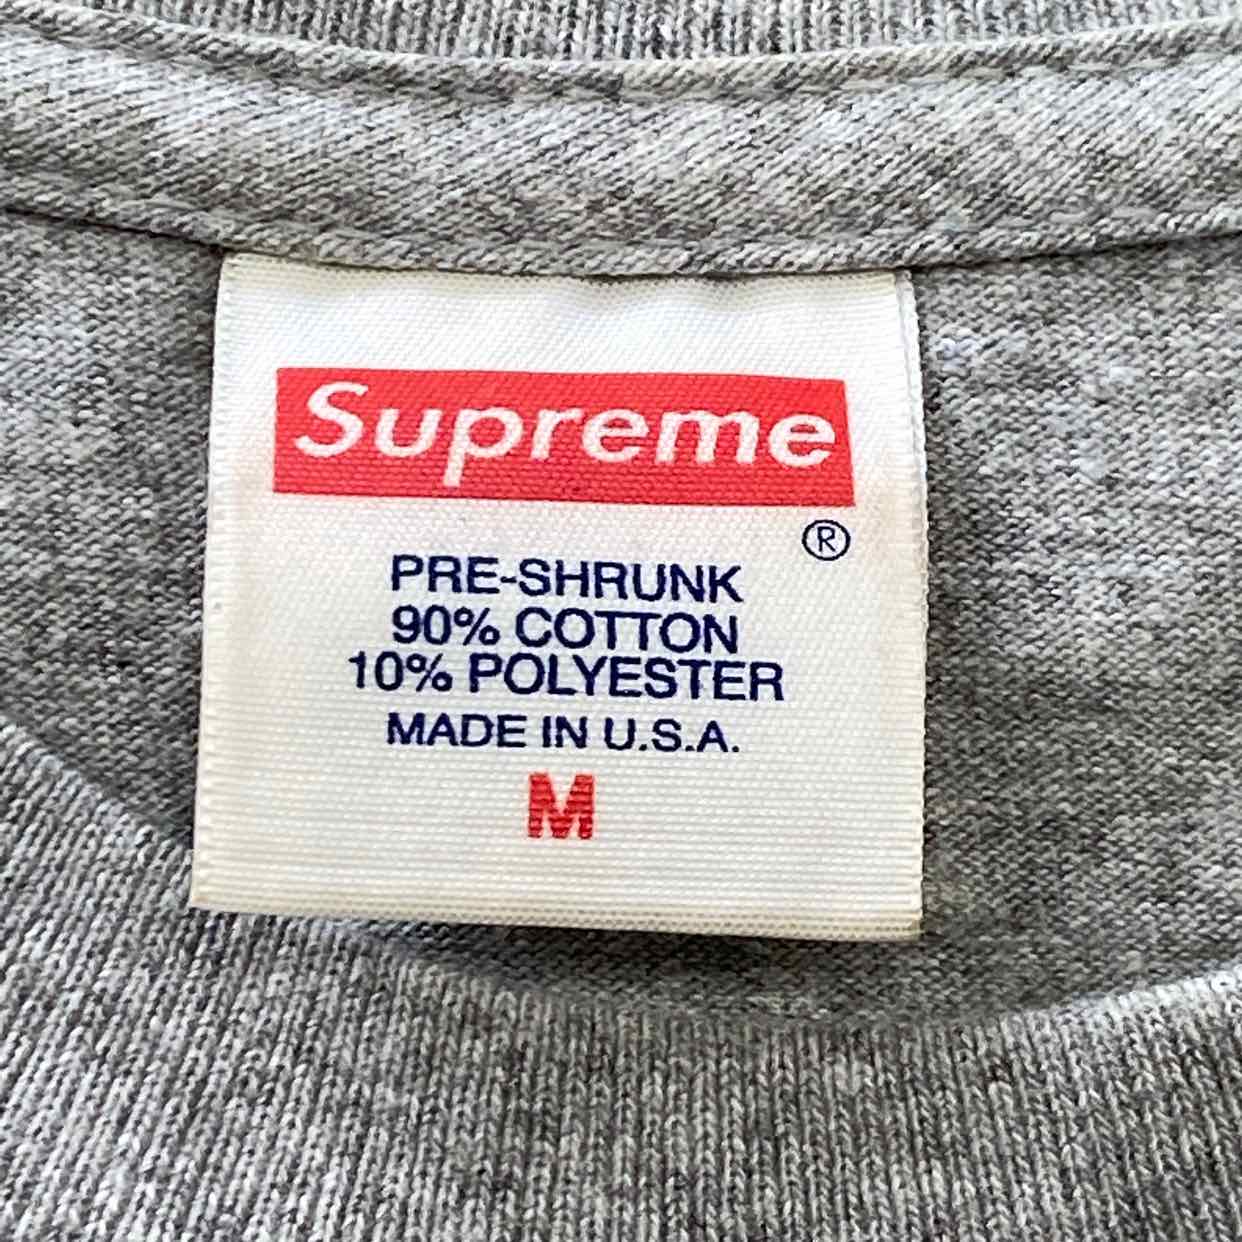 Supreme T-Shirt &quot;TAXI&quot; Grey Used Size M